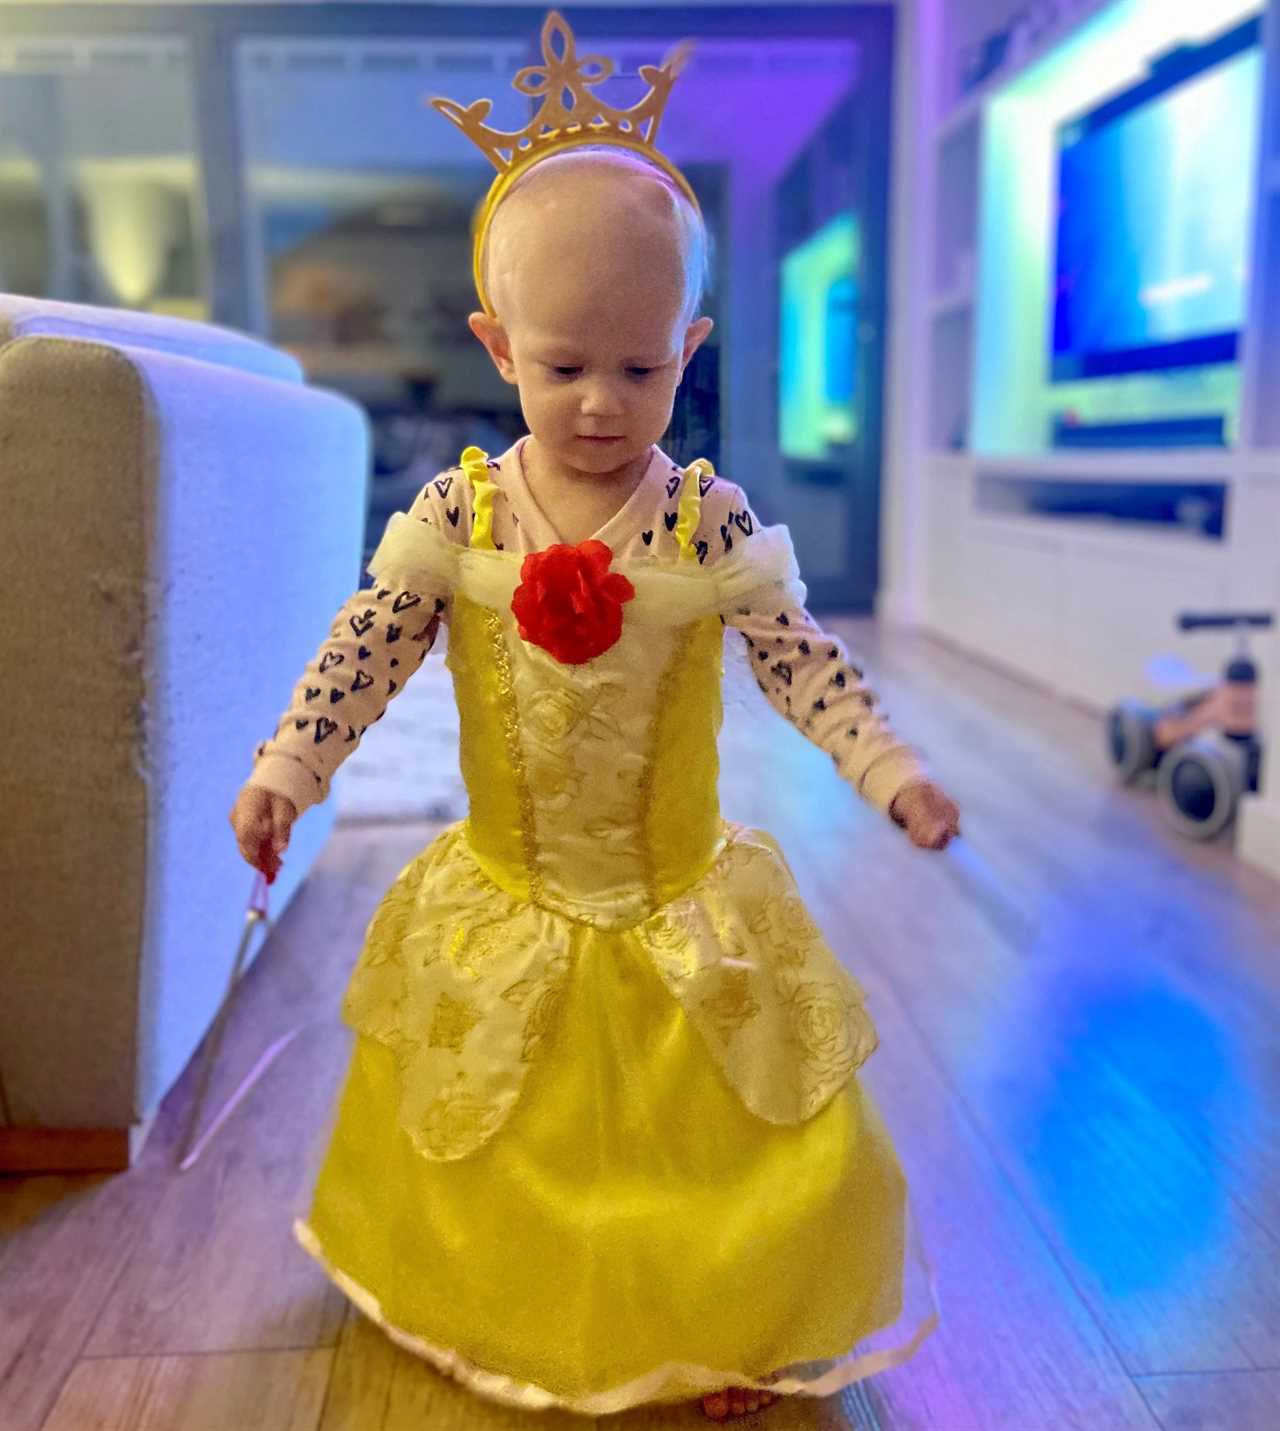 Parents share heartbreaking pictures of their little girl and medics ‘don’t know’ how to treat child’s rare cancer